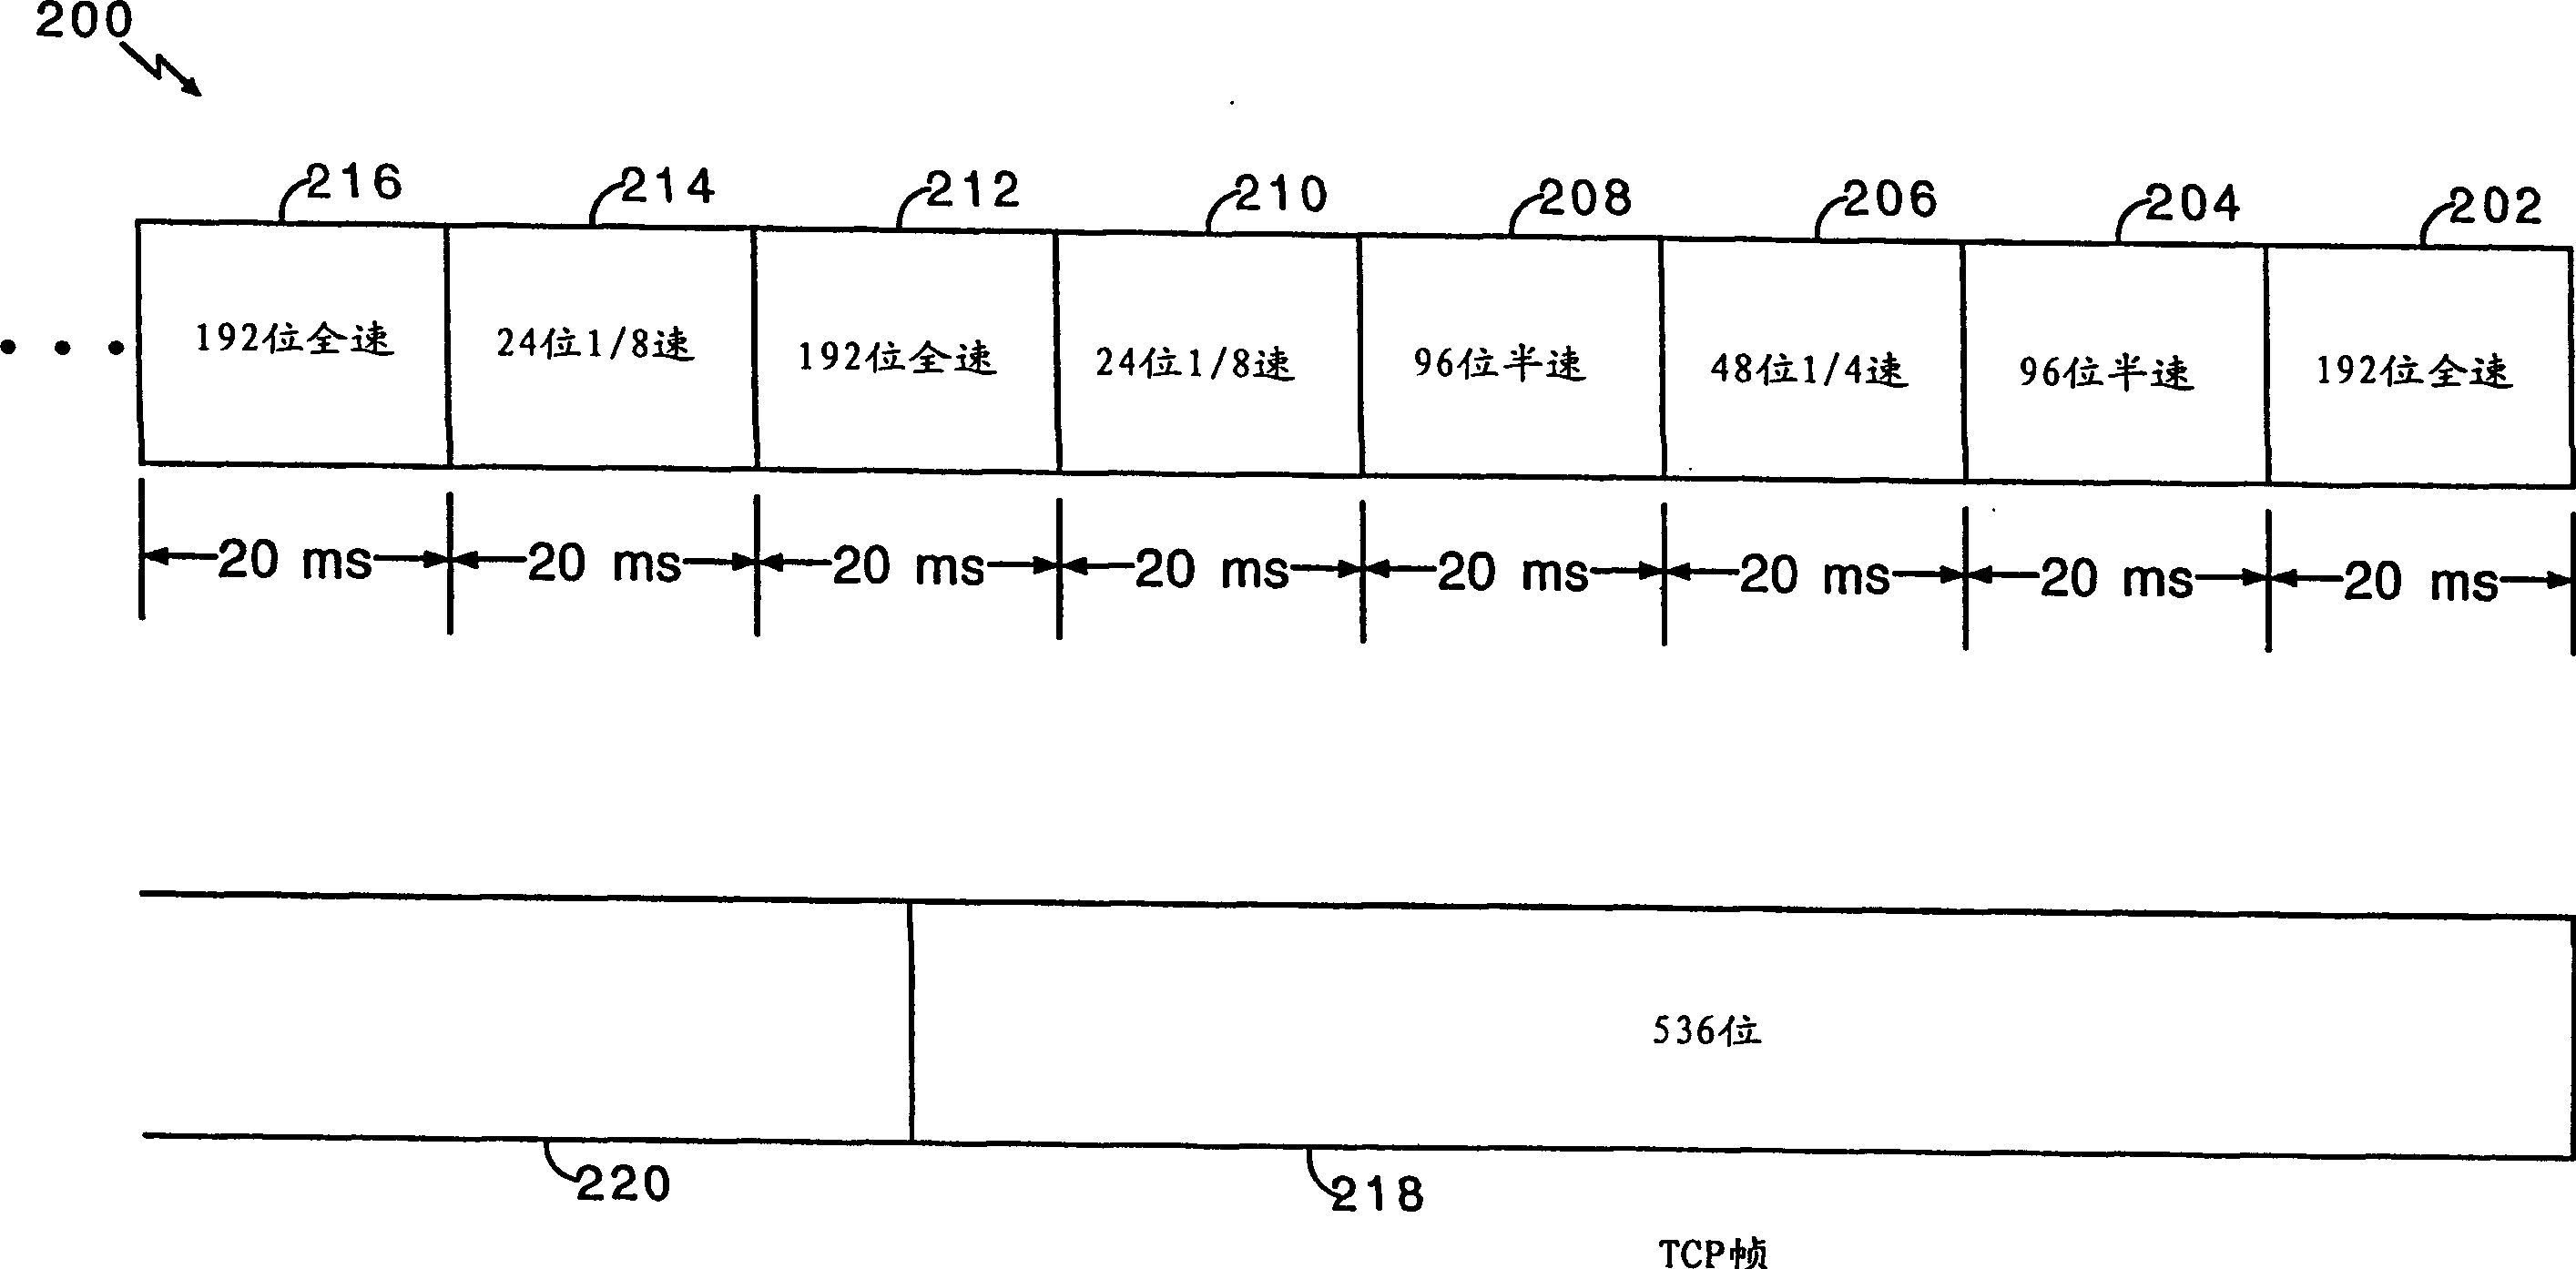 Method and apparatus for efficient data transmission control in wireless voice-over-data communication system